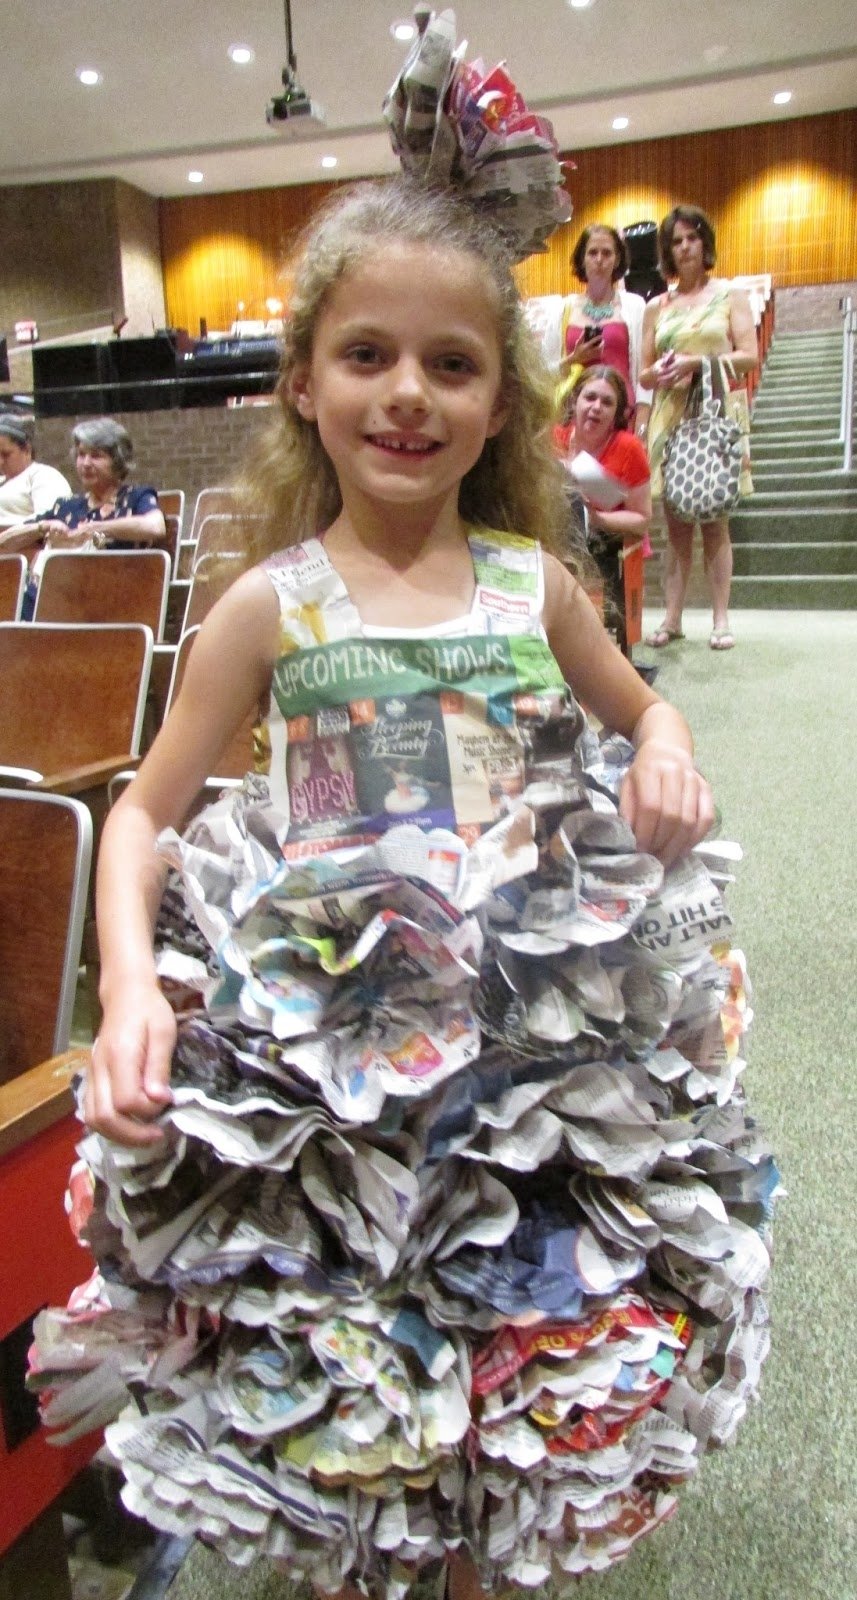 10 Fashionable Girl Scout Silver Award Project Ideas girl scouts of the colonial coast blog june 2015 2022